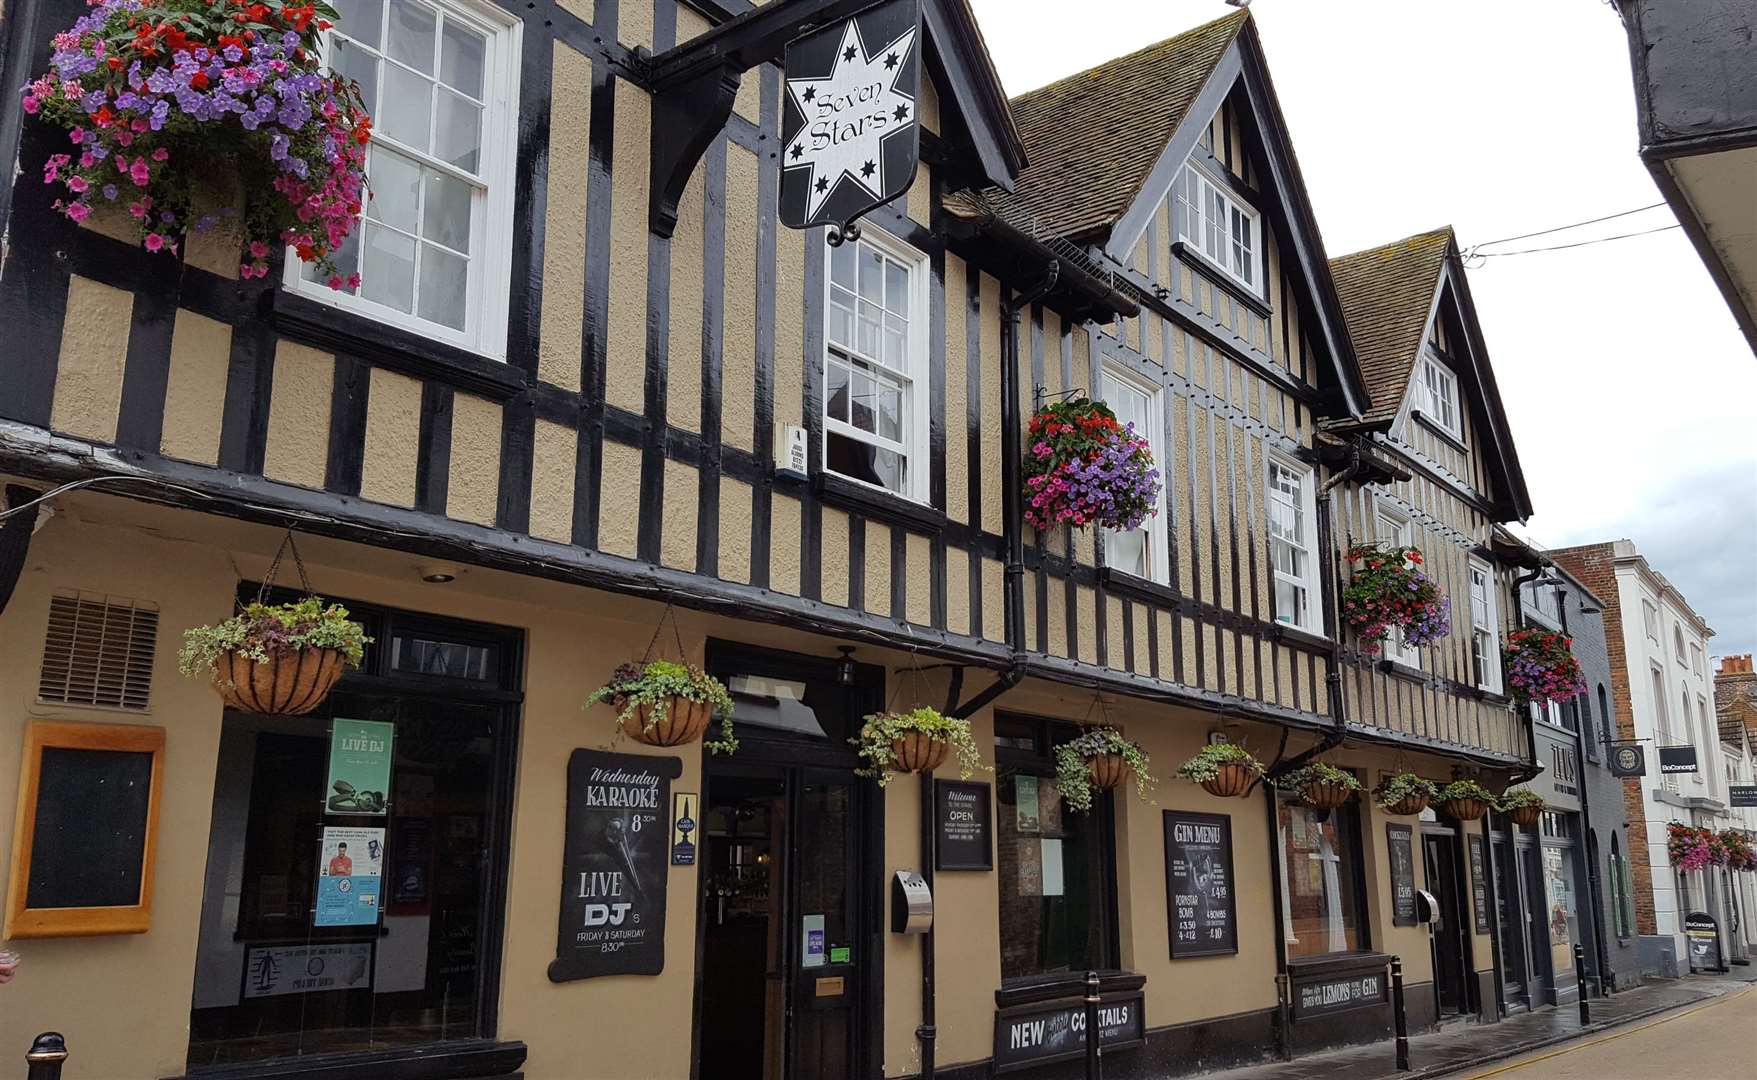 Police were called to the Seven Stars pub